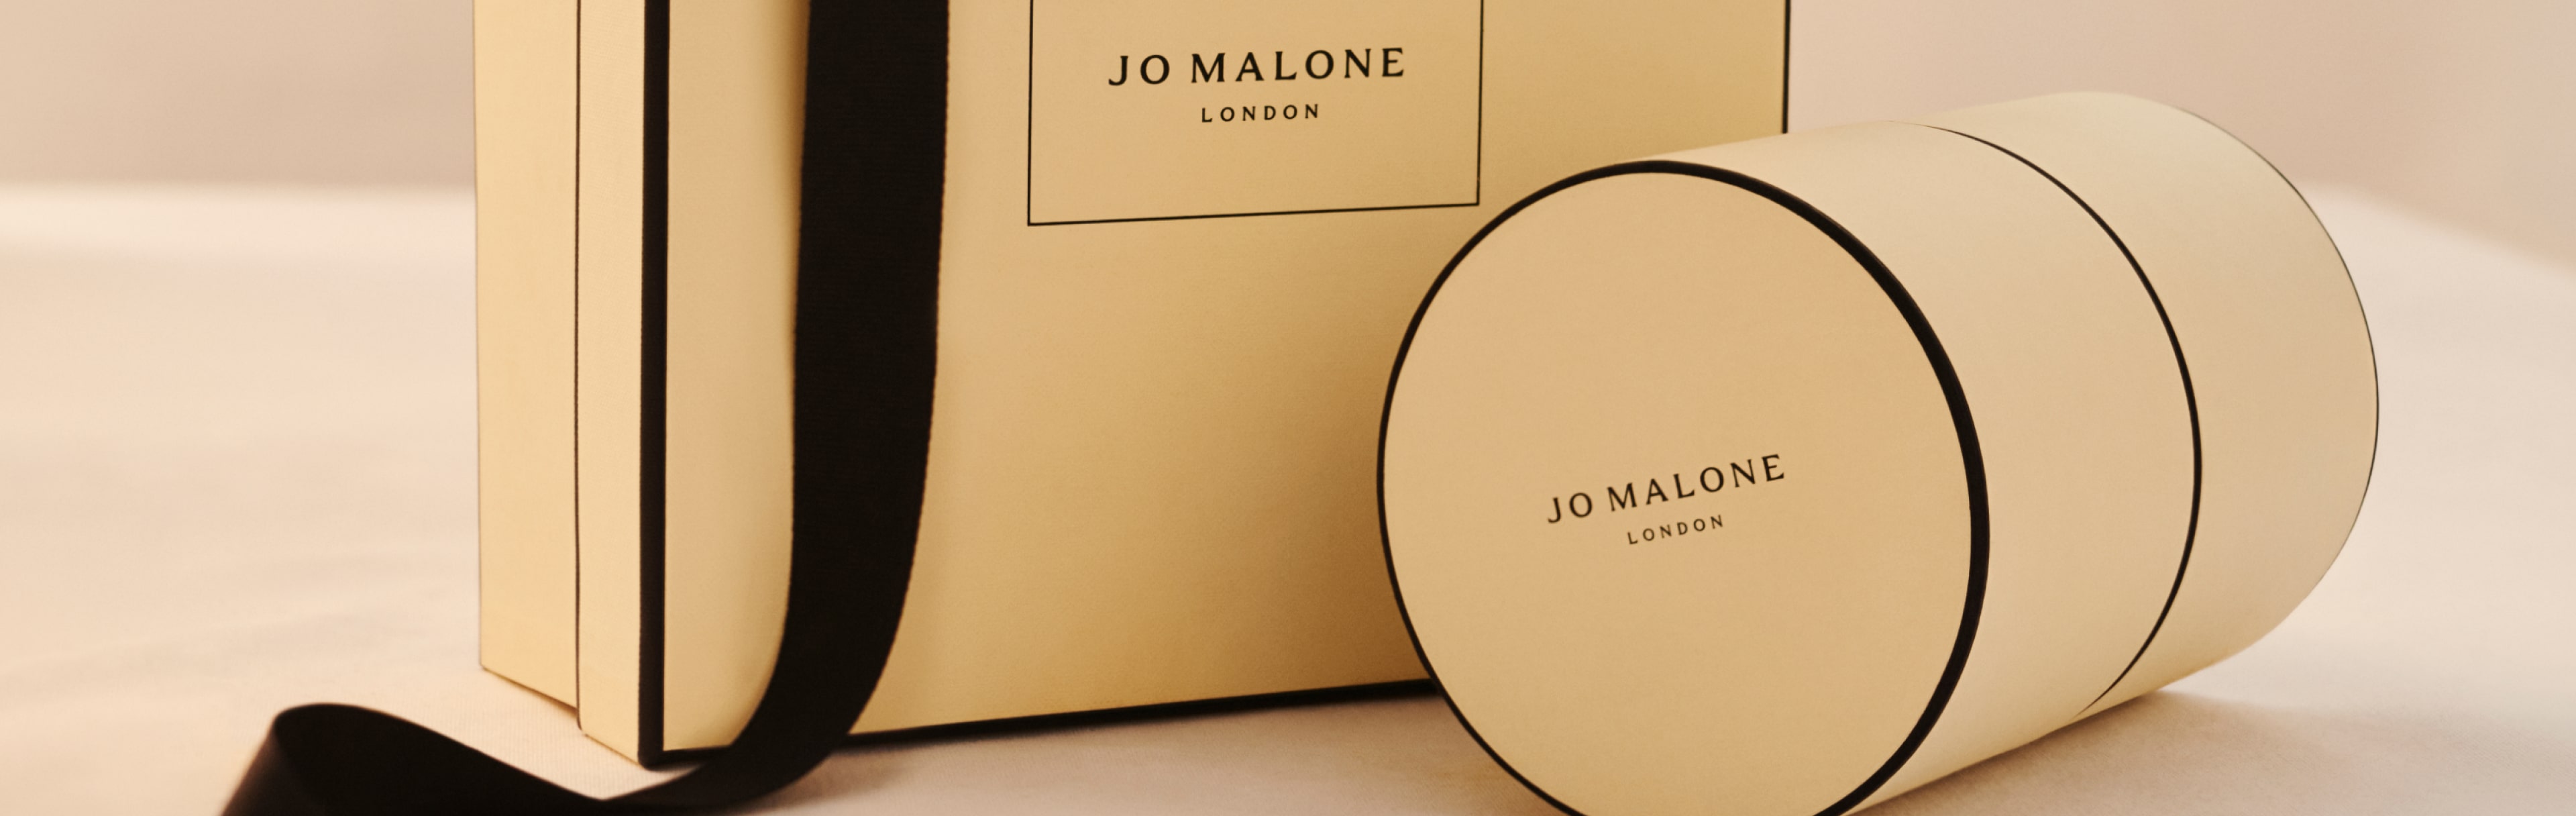 woman sitting on a hill, holding classic jo malone london black and cream gift boxes